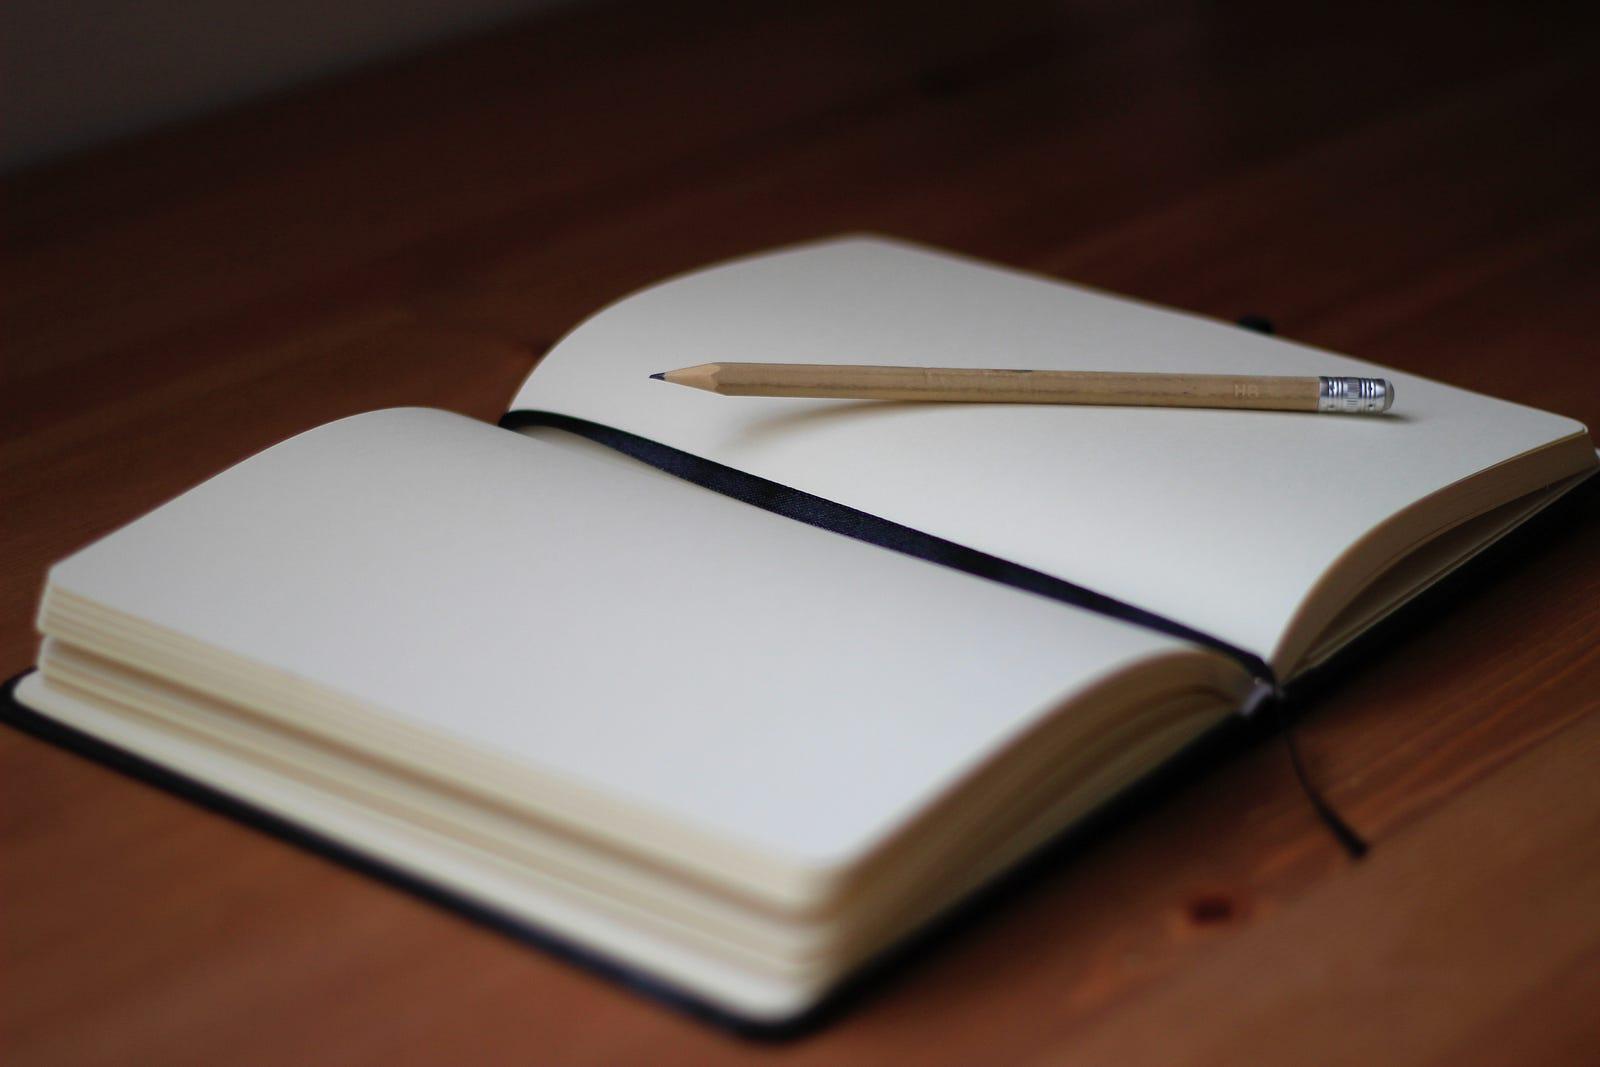 a journal sitting open on a wooden surface with a pencil on top